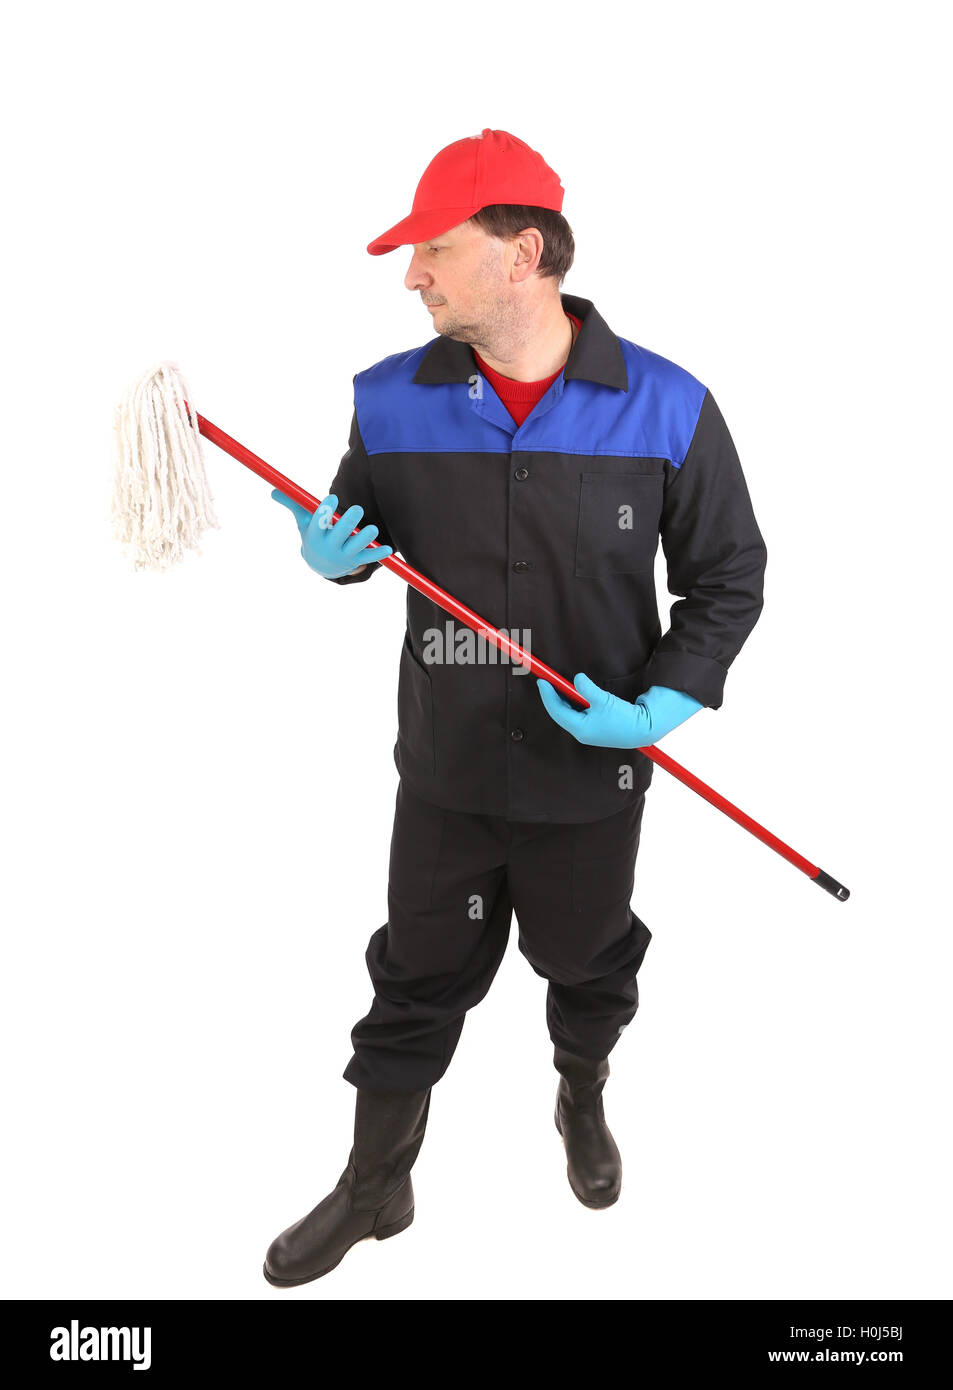 Man in workwear with mop. Stock Photo